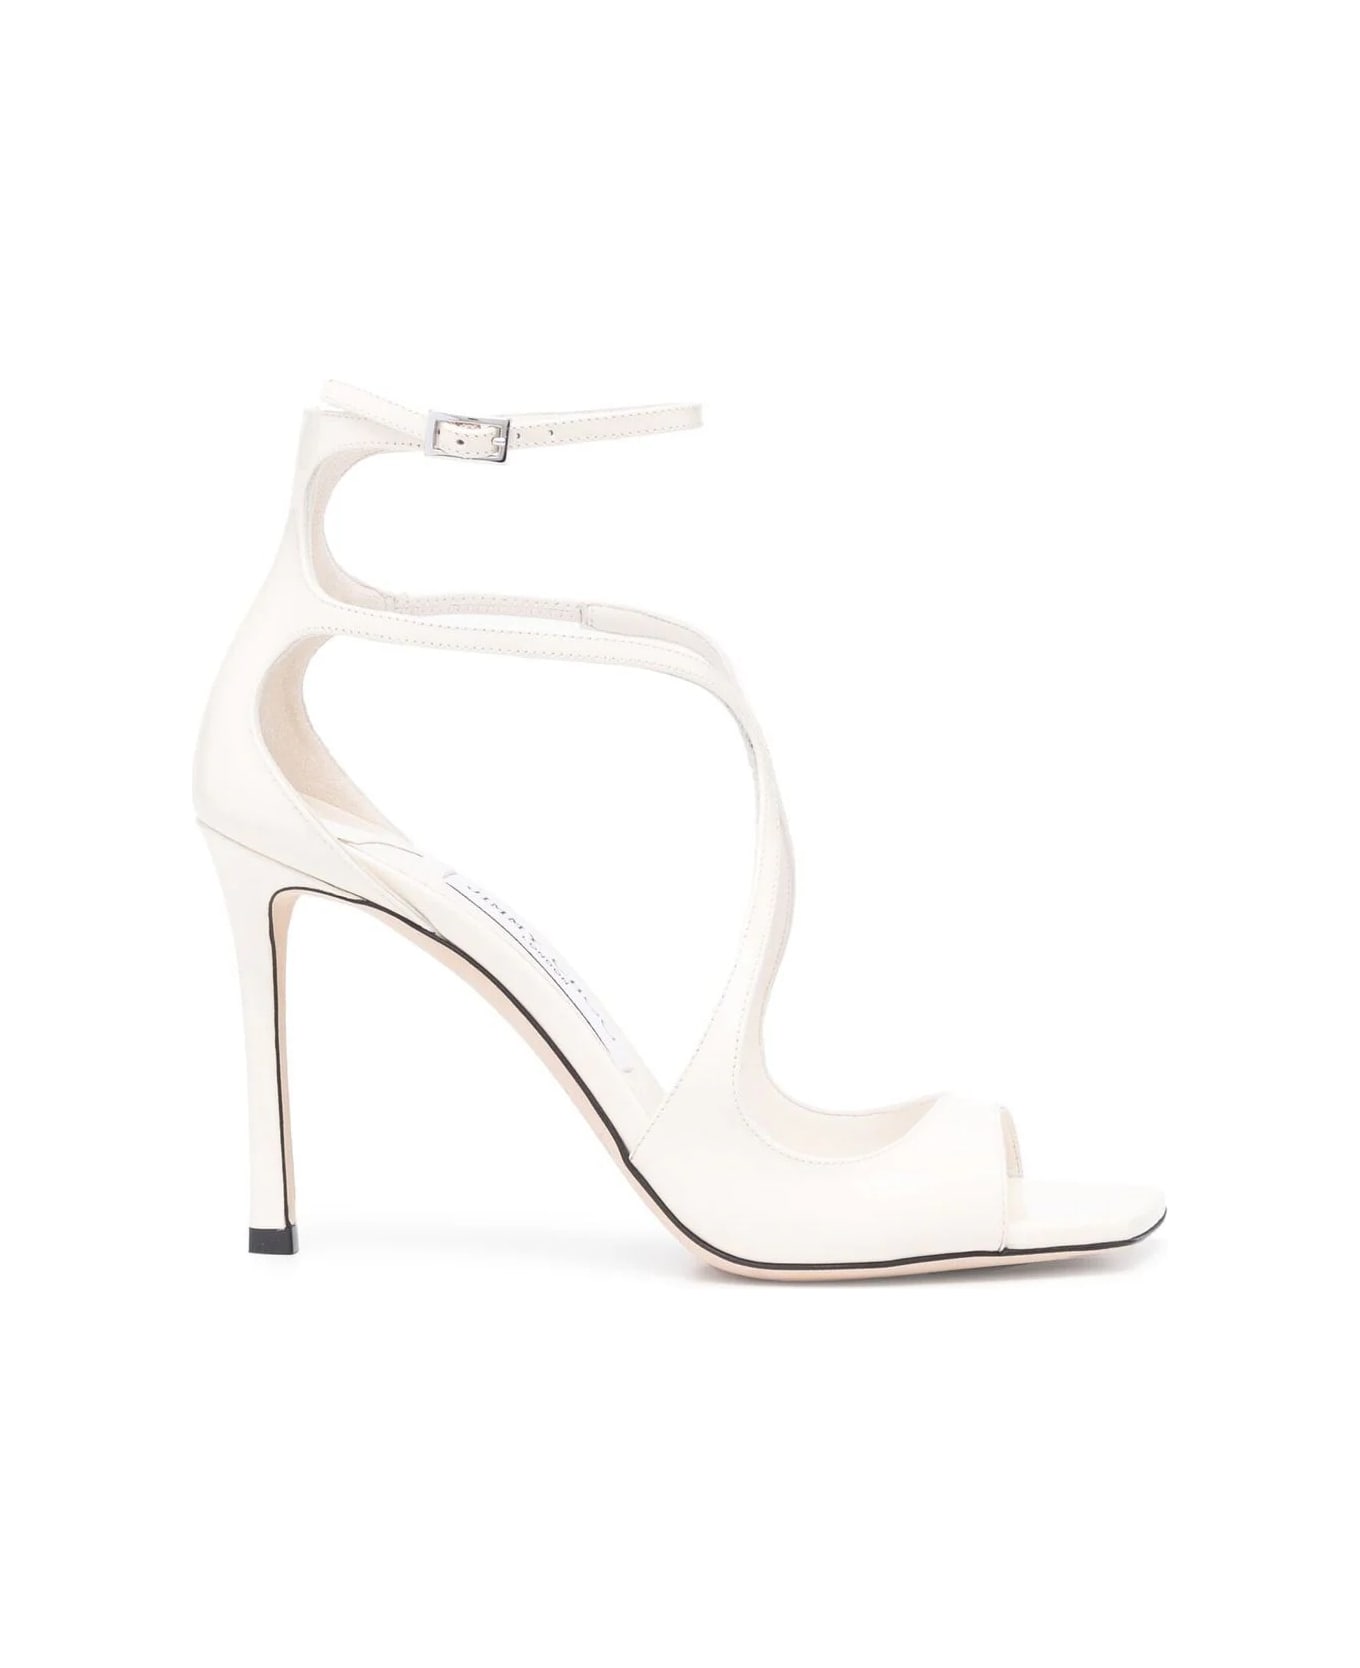 Jimmy Choo Azia Sandals In Milk White Patent Leather - White